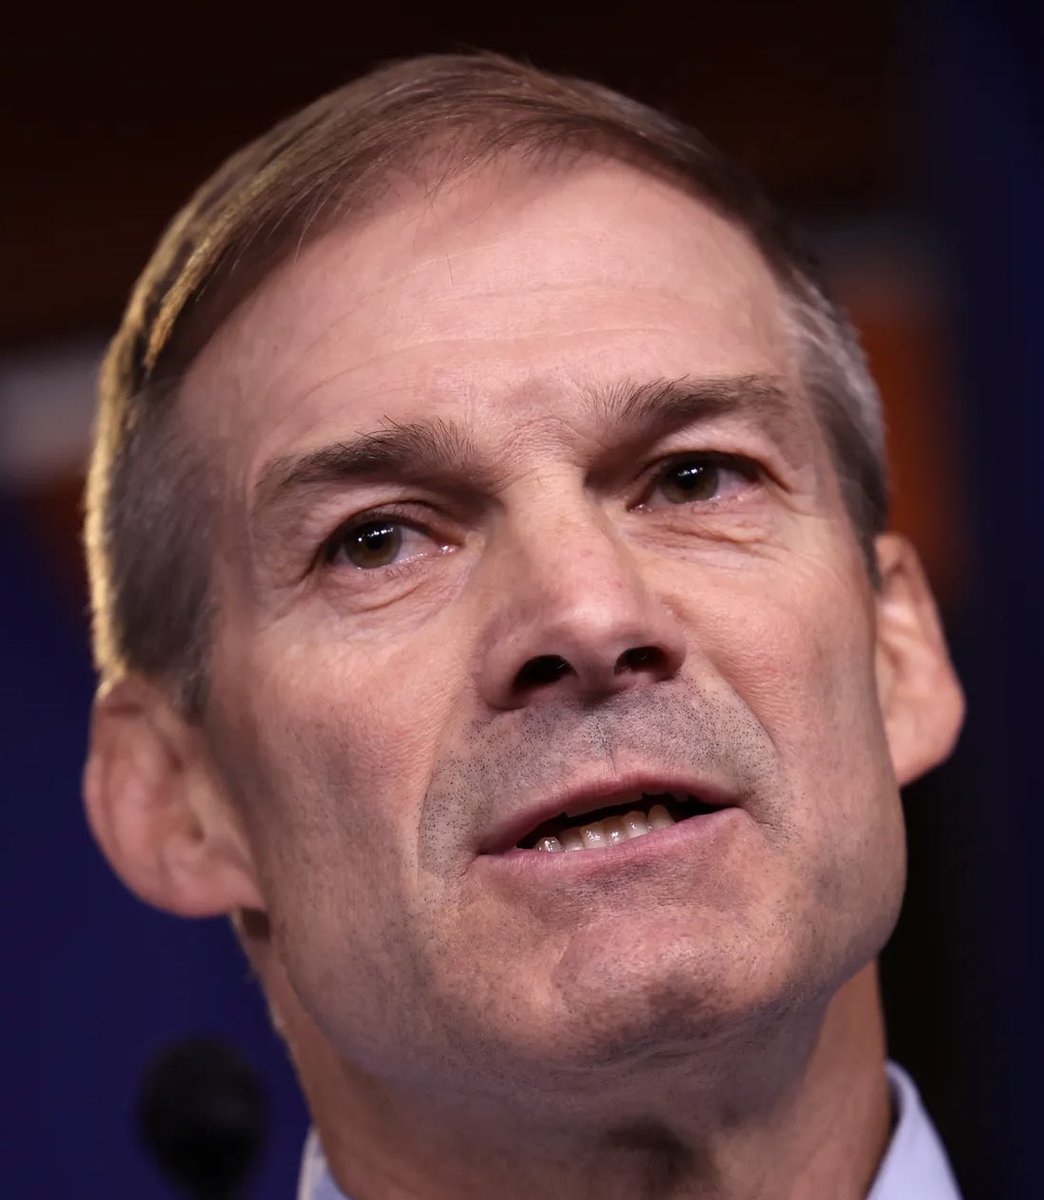 BREAKING: Republican House Speaker candidate Jim Jordan is hit with devastating news as NBC News drops bombshell, reveals that “four of the former Ohio State University wrestlers who have accused Jordan of failing to protect them from a sexual predator when he was the team’s